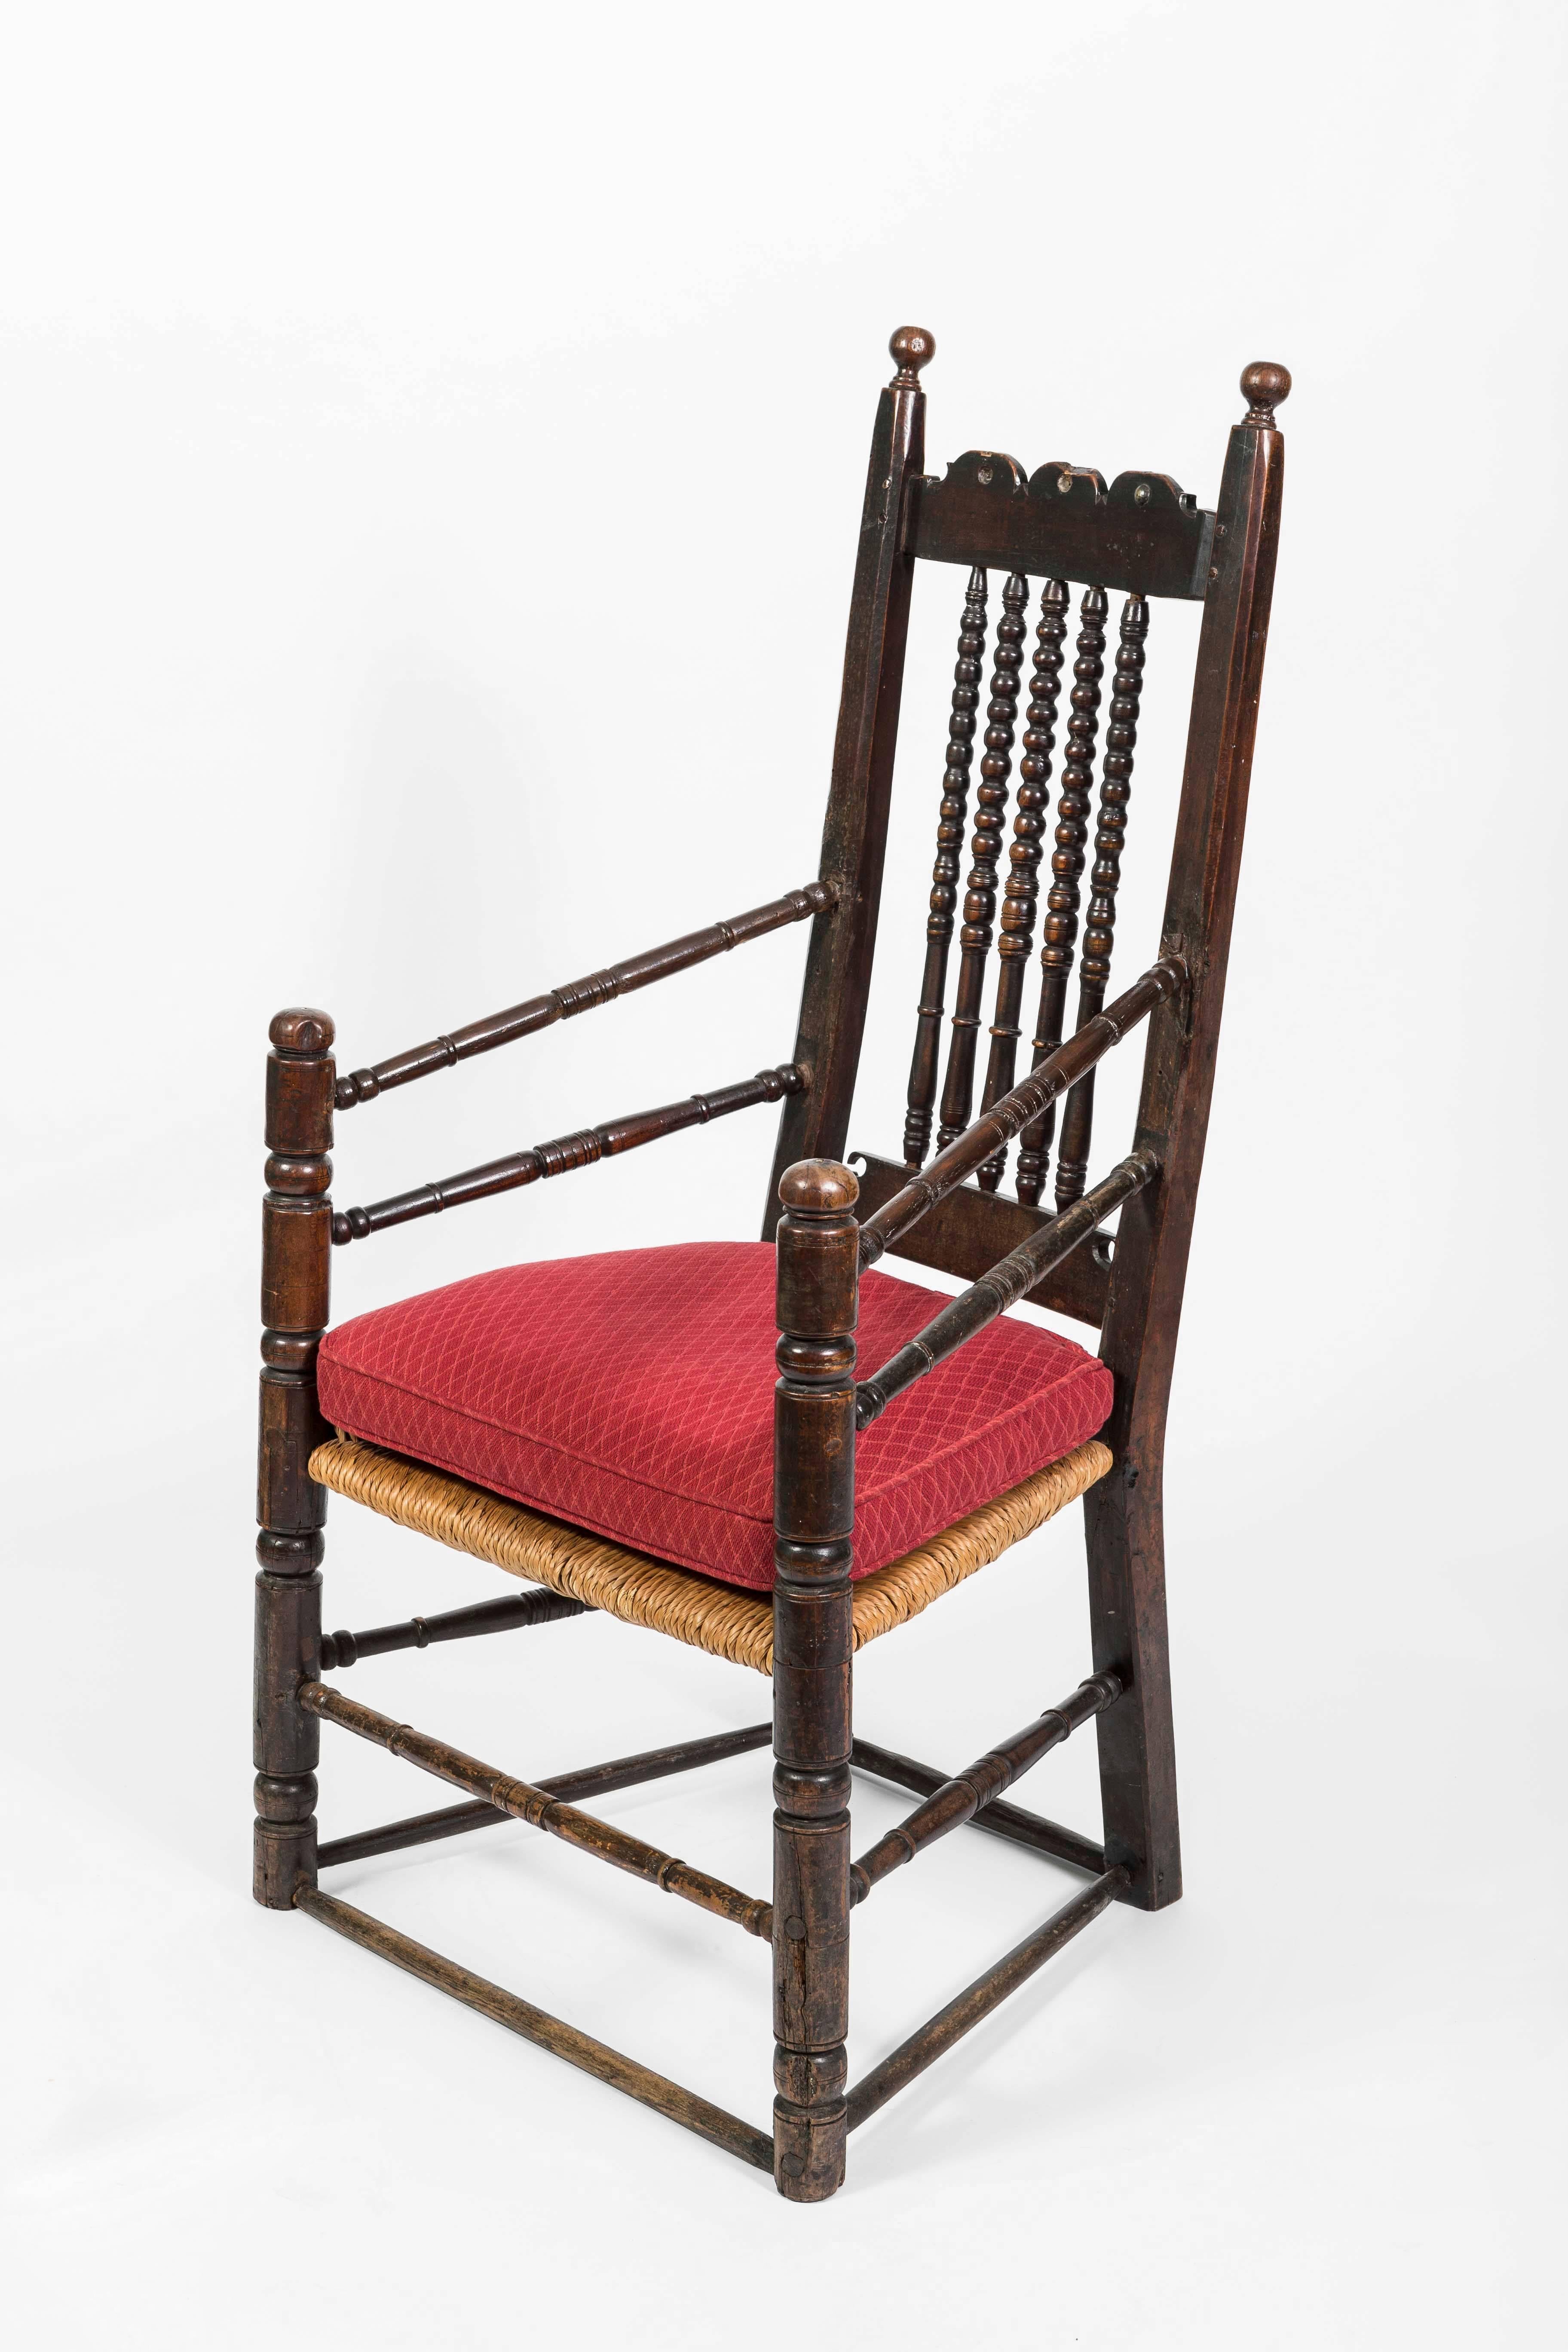 This nice 18th century English oak Bannister armchair has rounded spindles with spools on the back. The base has two sets of stretchers and the arms have two stretches as well. It is fitted with a rush seat.